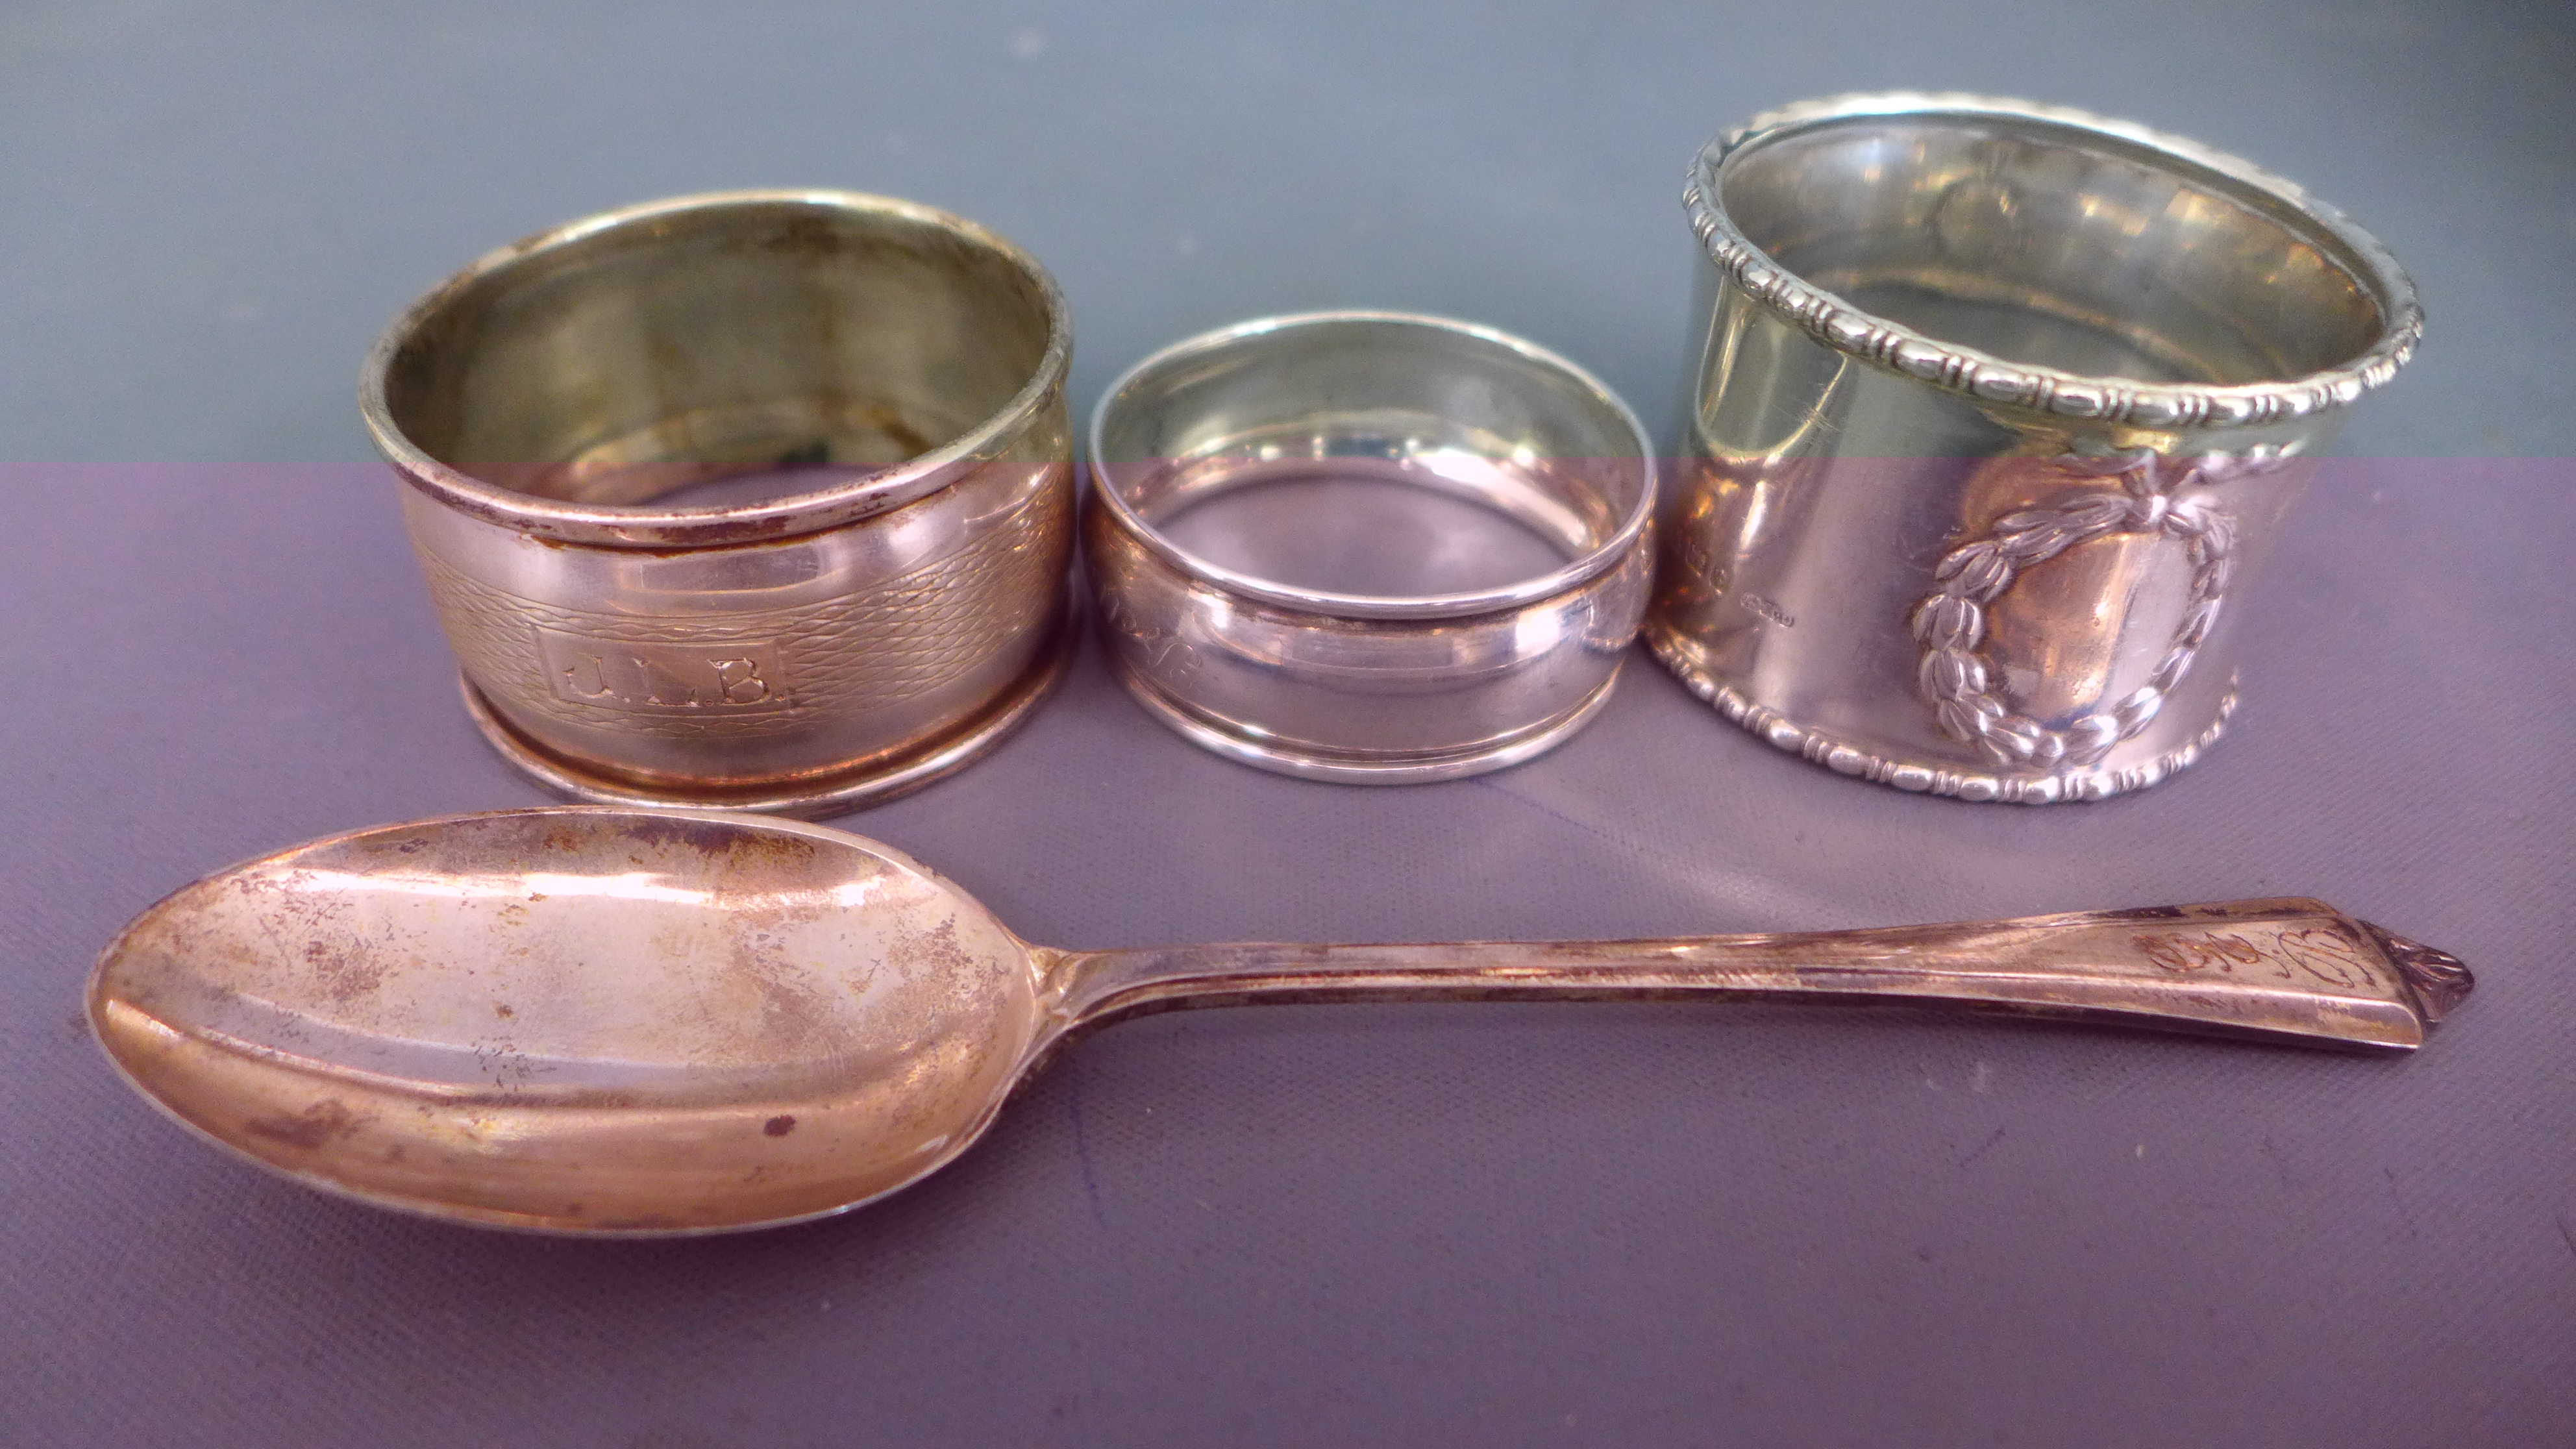 Three silver hallmarked napkin rings and a silver hallmarked teaspoon - approx weight 1.